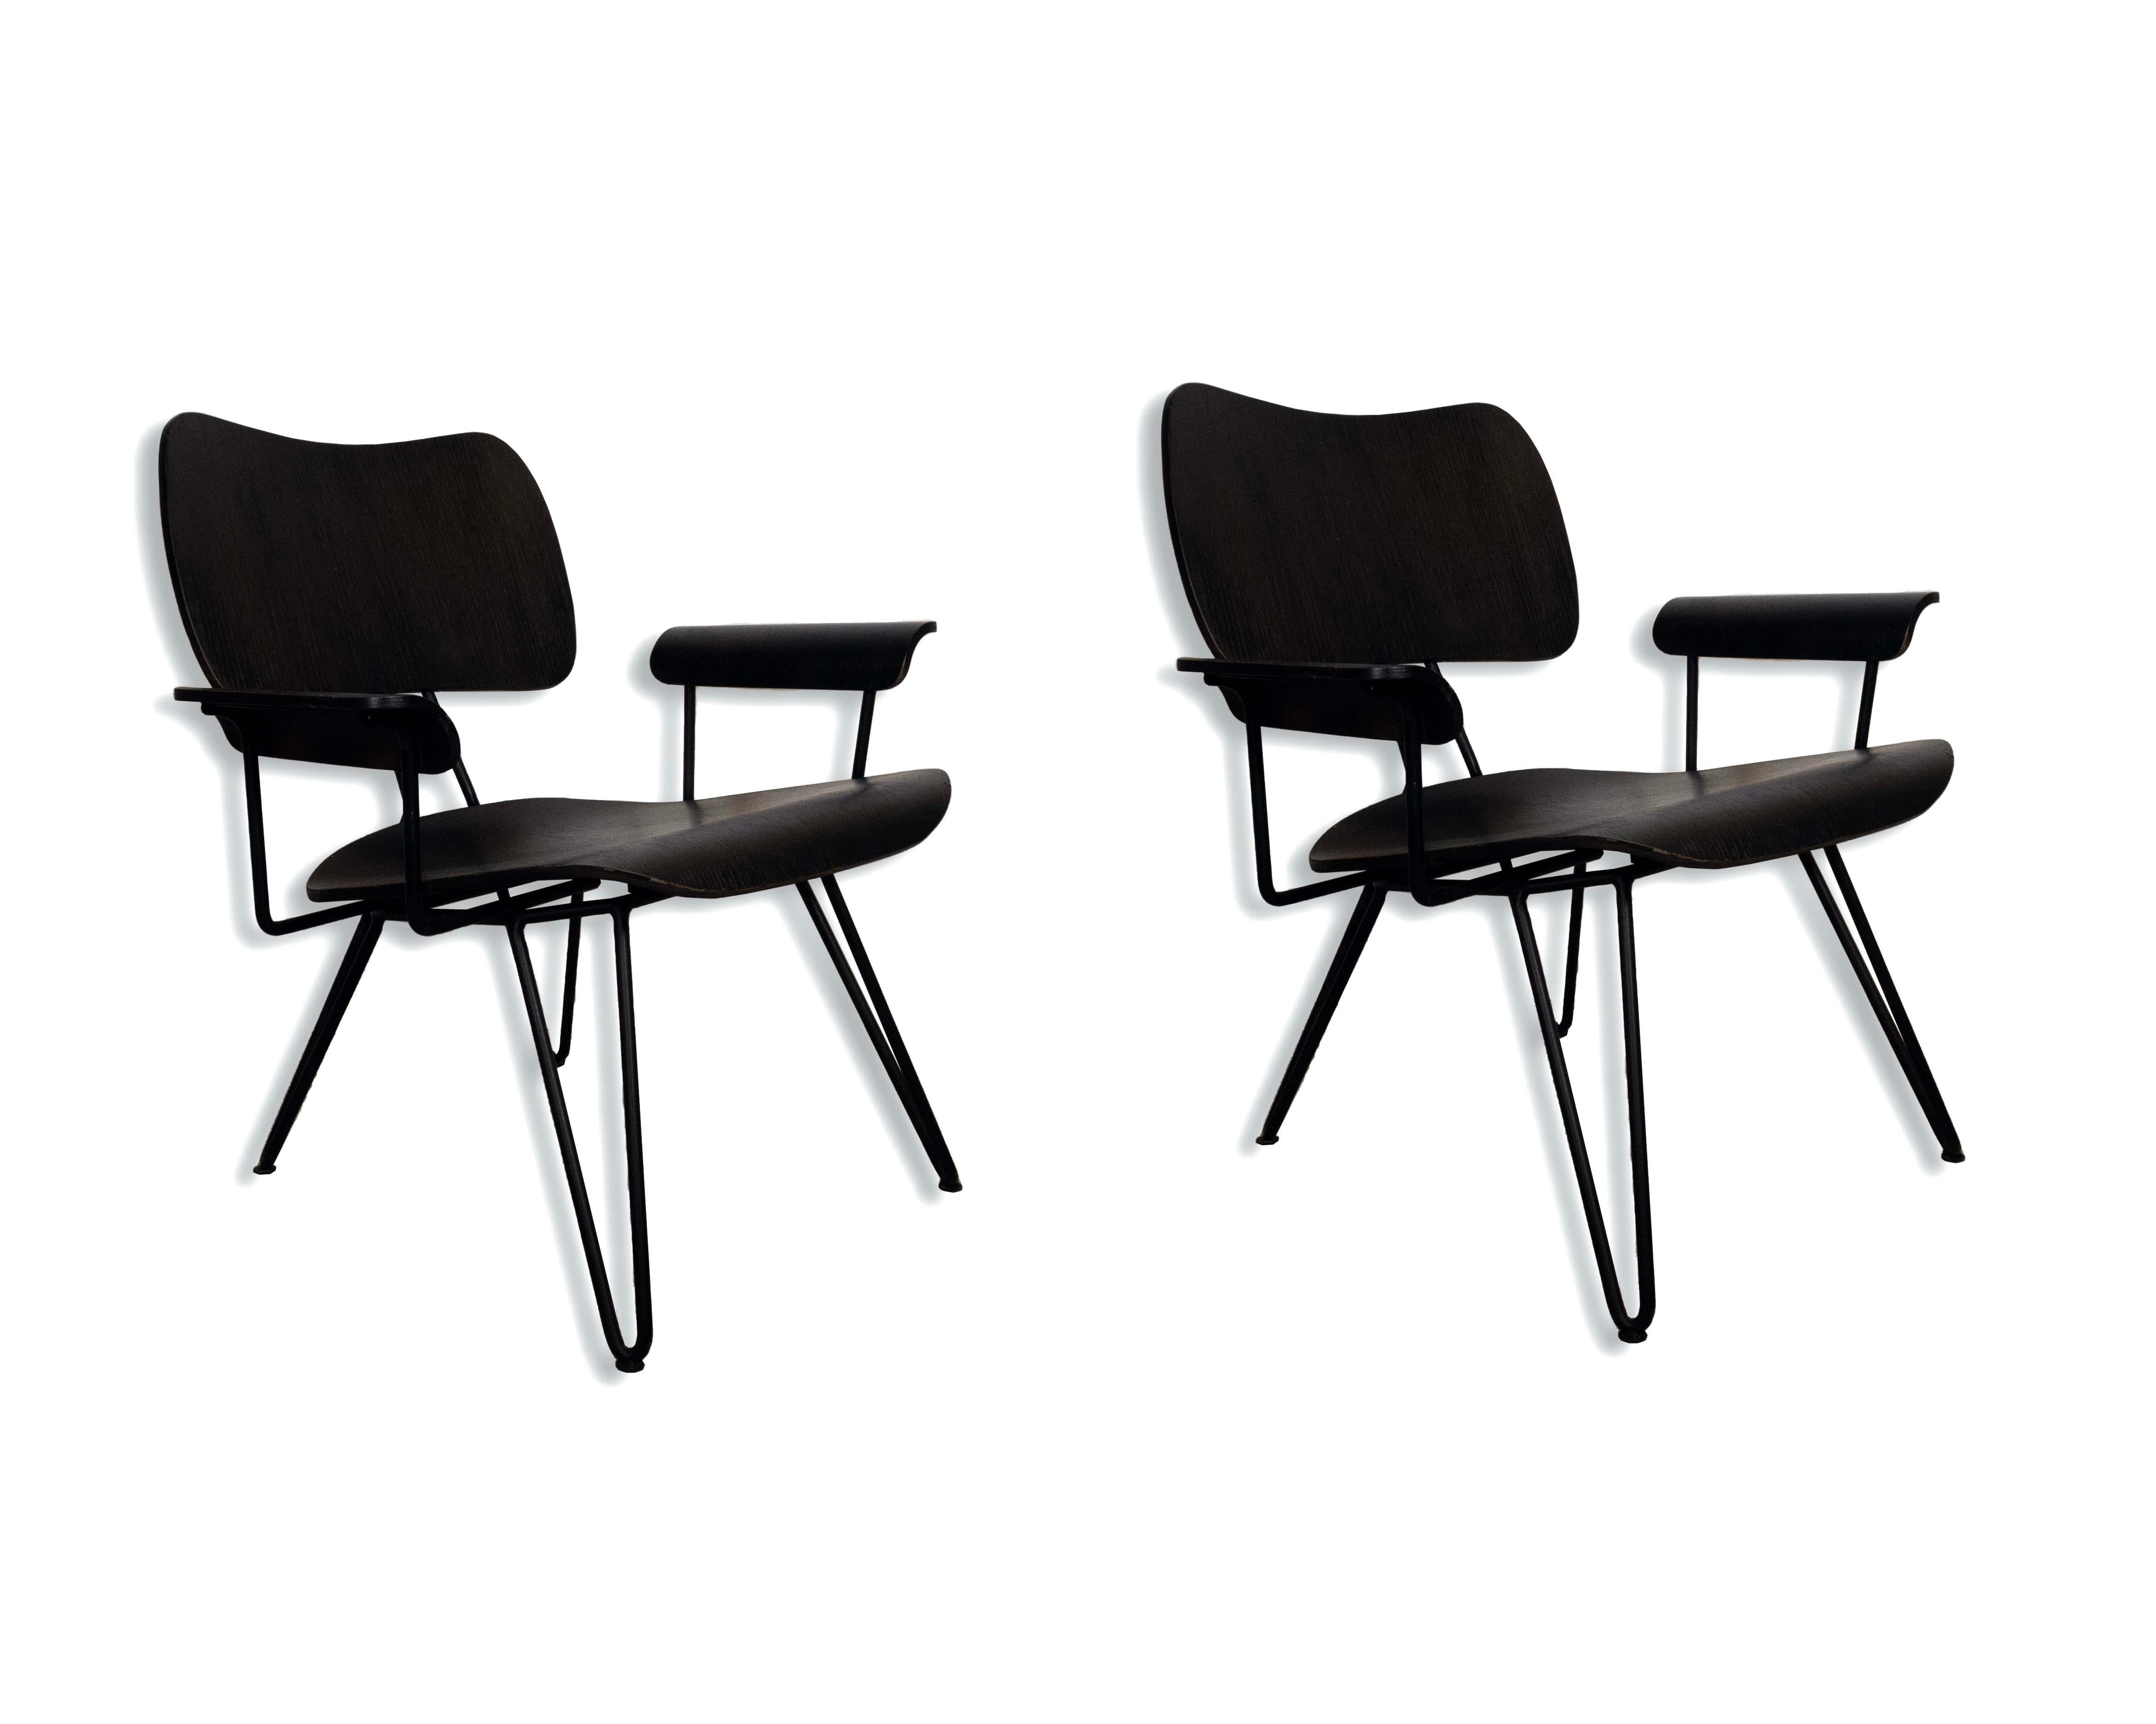 Le Shoppe Too presents this pair of beautifully designed lounge chairs by Diesel Creative Team for Moroso. Overdyed Reloaded is the term for these birch wood and black wrought iron chairs. In very good condition. Dimensions: 29